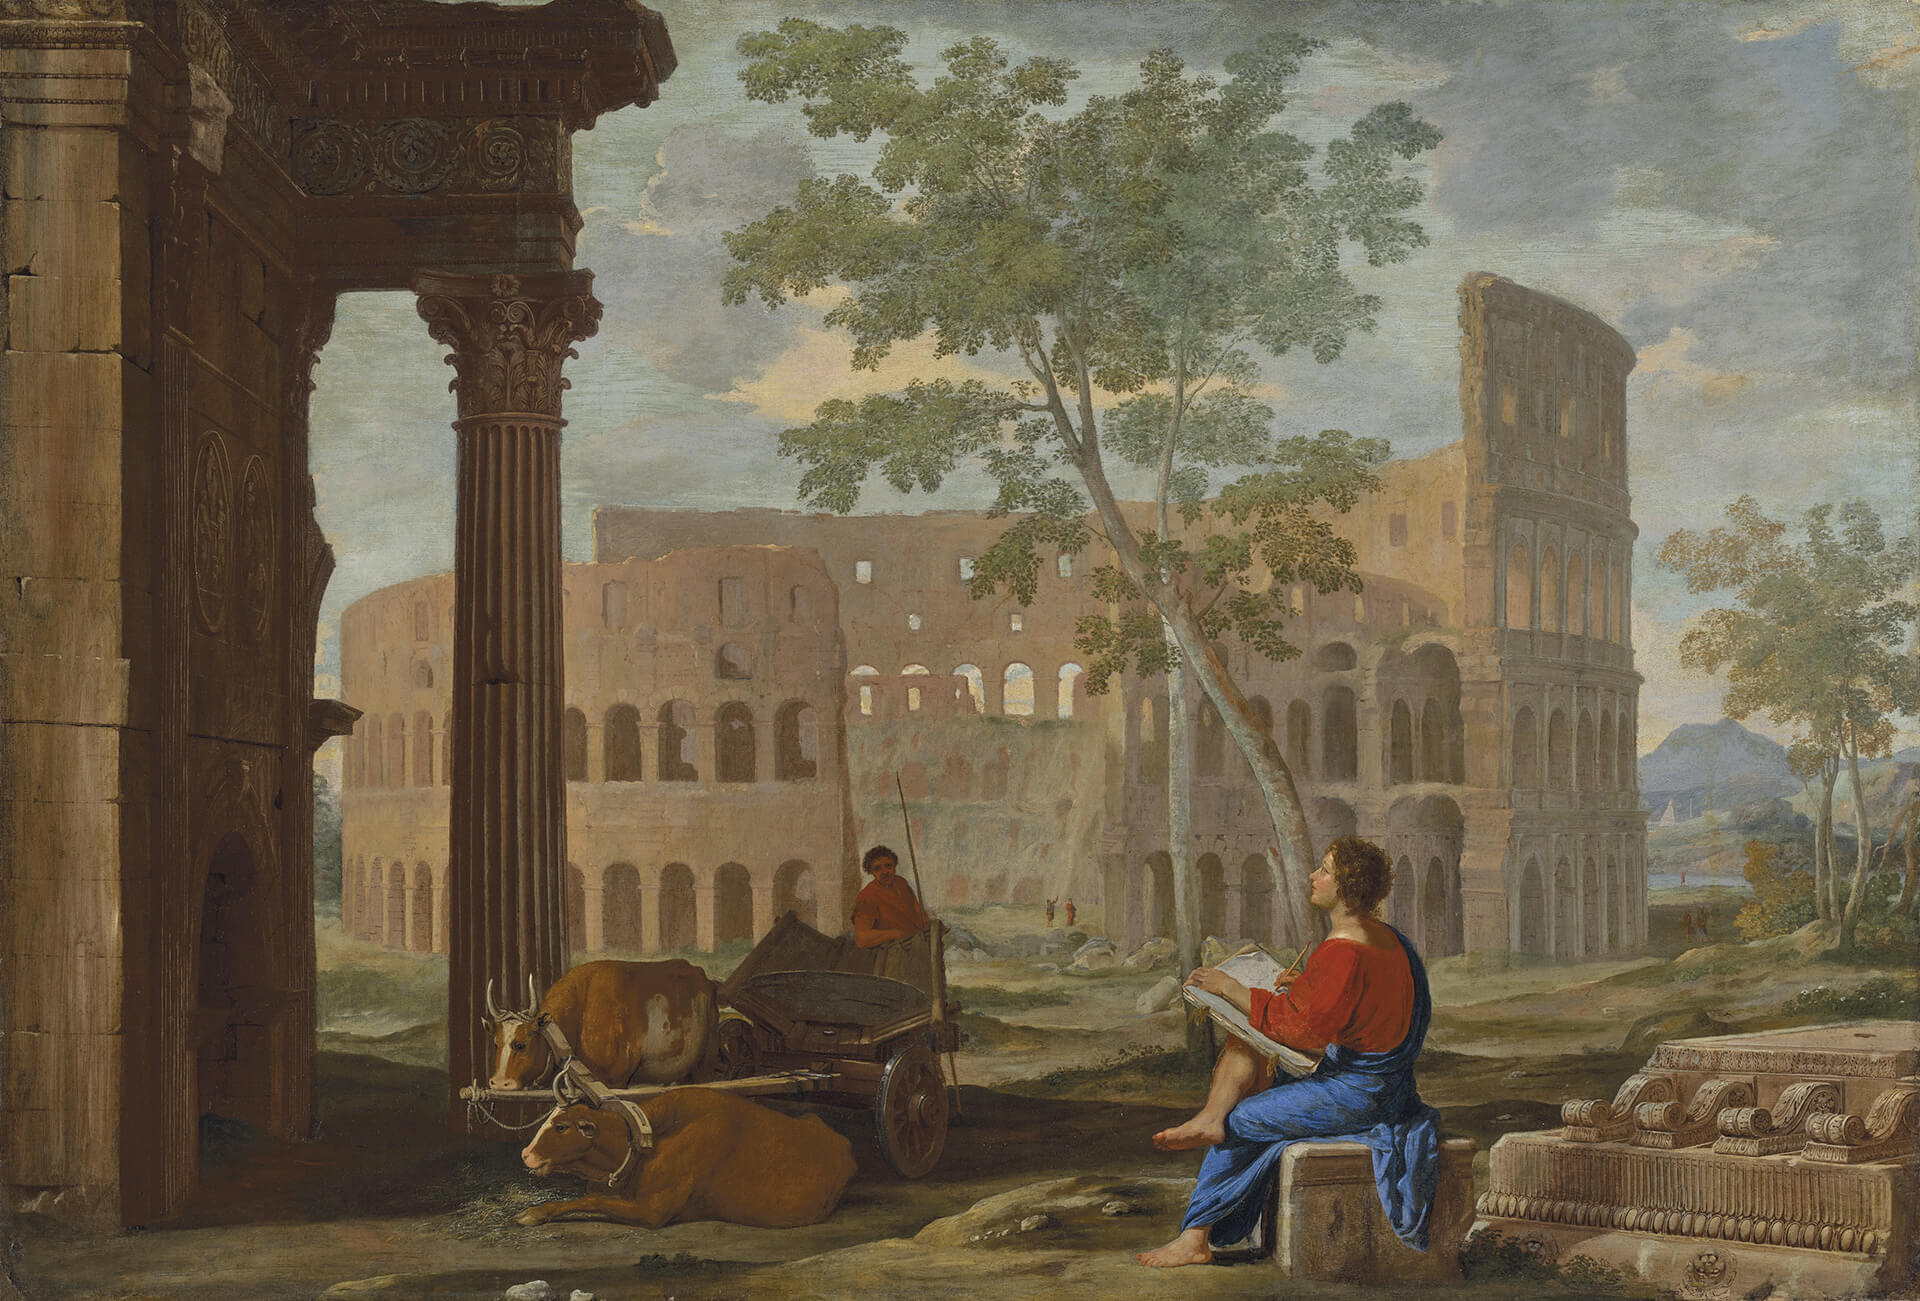 The Colosseum with an artist sketching